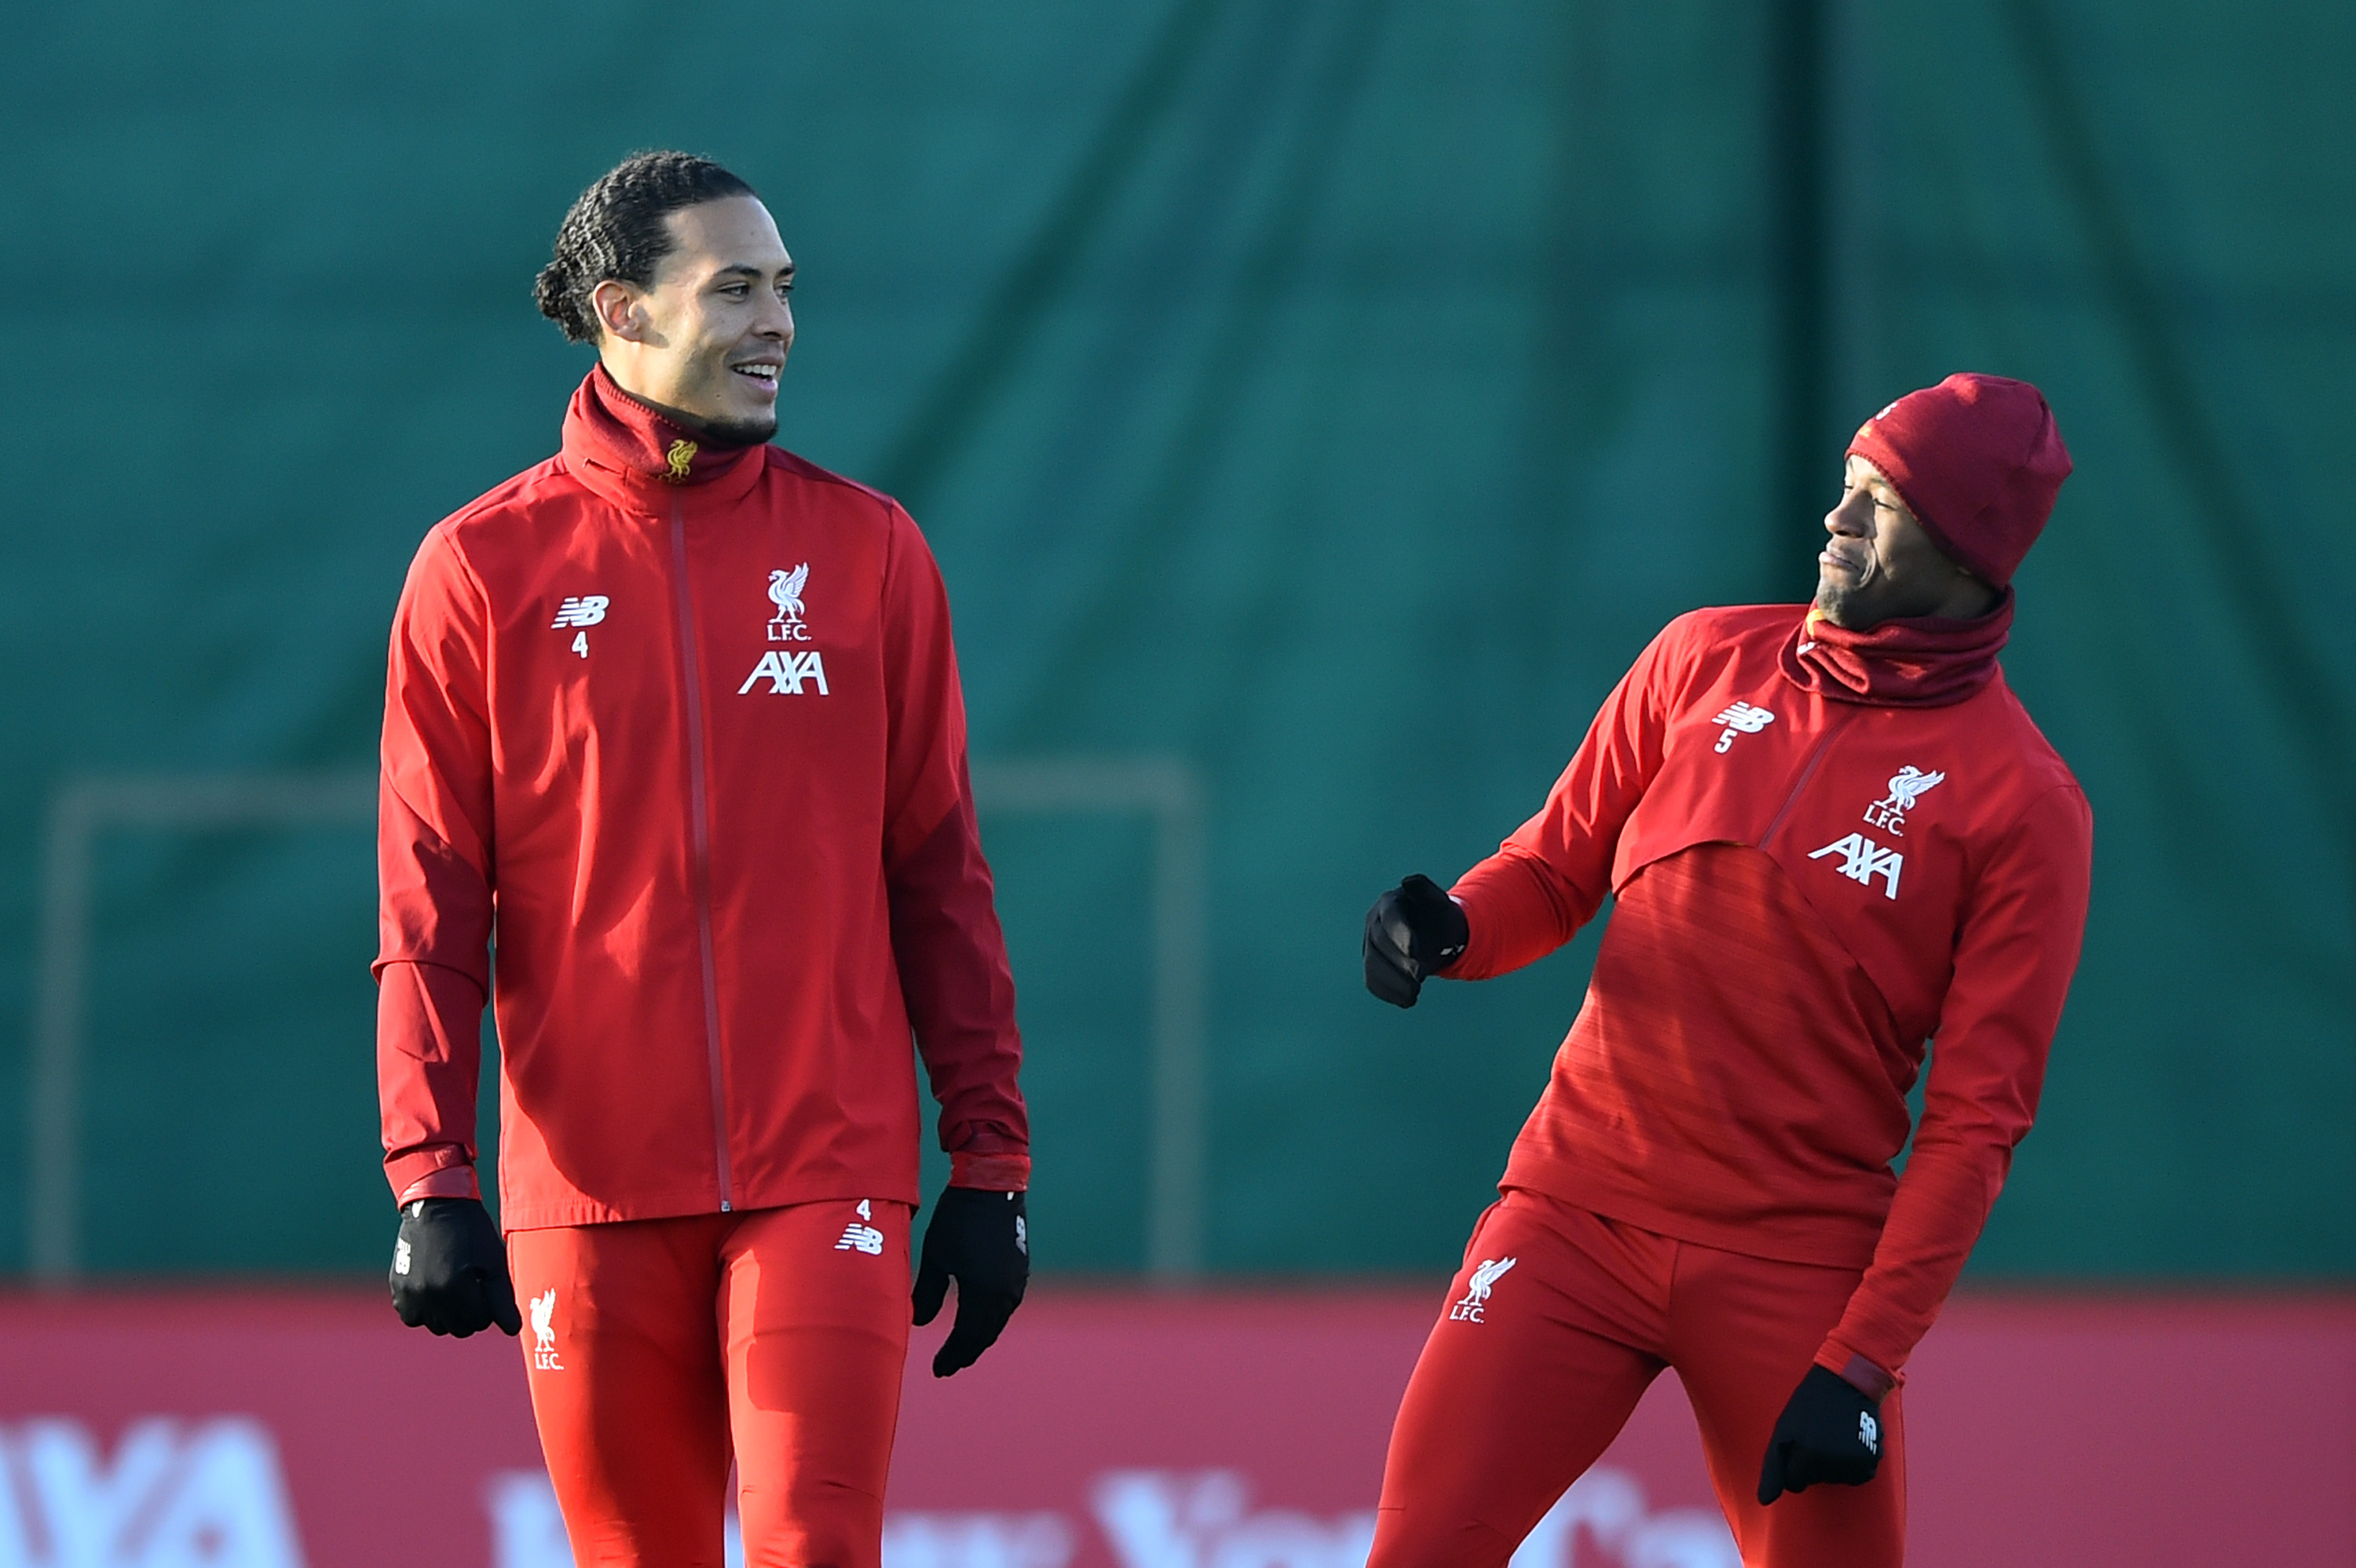 LIVERPOOL, ENGLAND - DECEMBER 09: Virgil van Dijk of Liverpool and Georginio Wijnaldum of Liverpool share a joke during a training session ahead of their UEFA Champions League Group E match against RB Salzburg at Melwood Training Ground on December 09, 2019 in Liverpool, England. (Photo by Nathan Stirk/Getty Images)